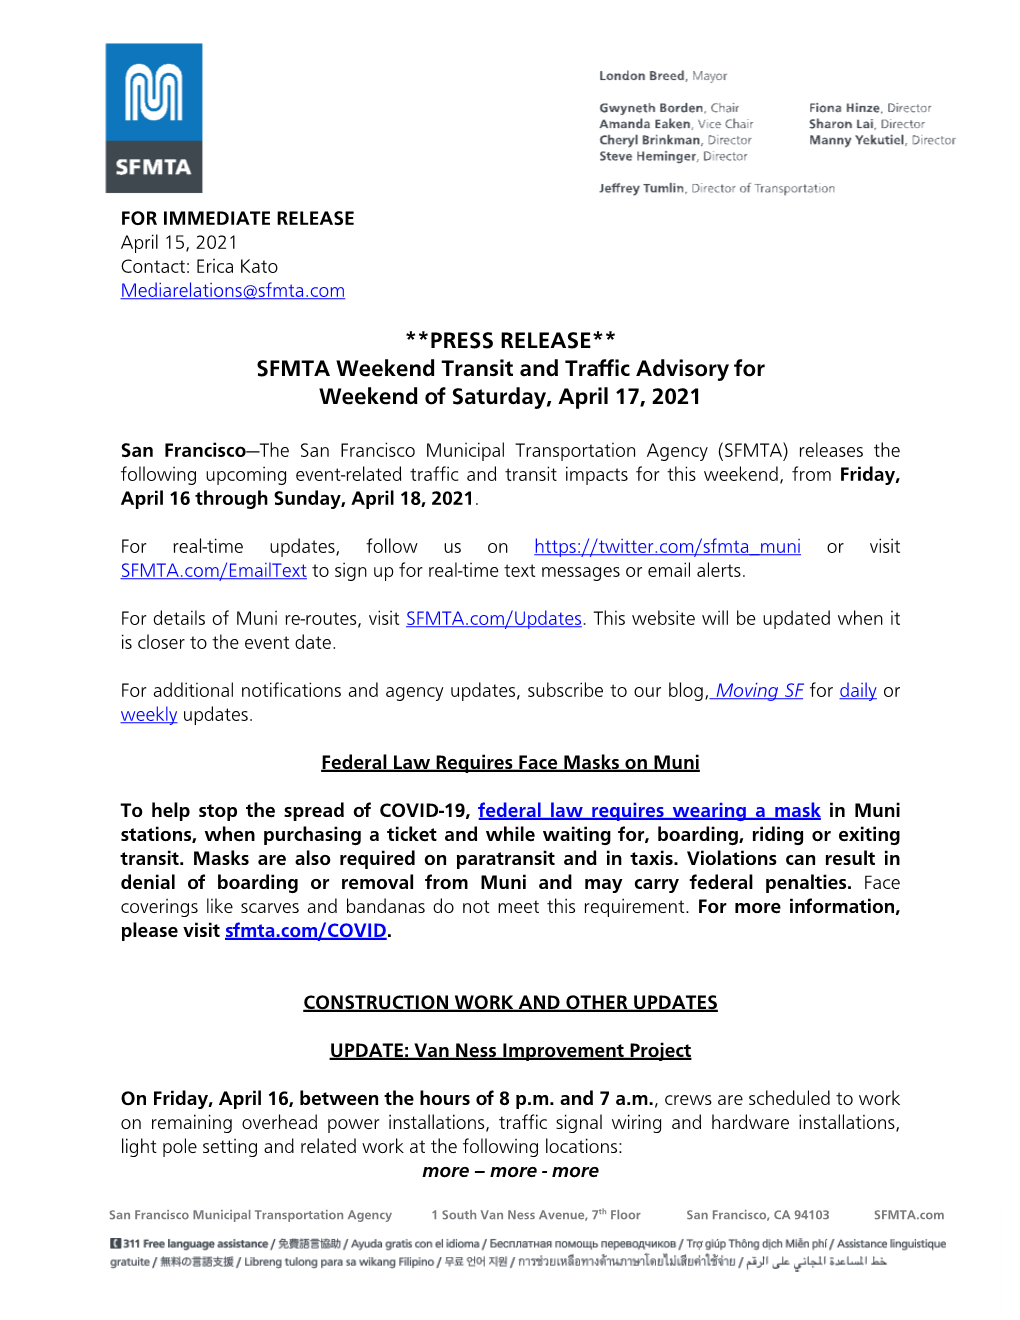 SFMTA Weekend Transit and Traffic Advisory for Saturday, April 17, 2021